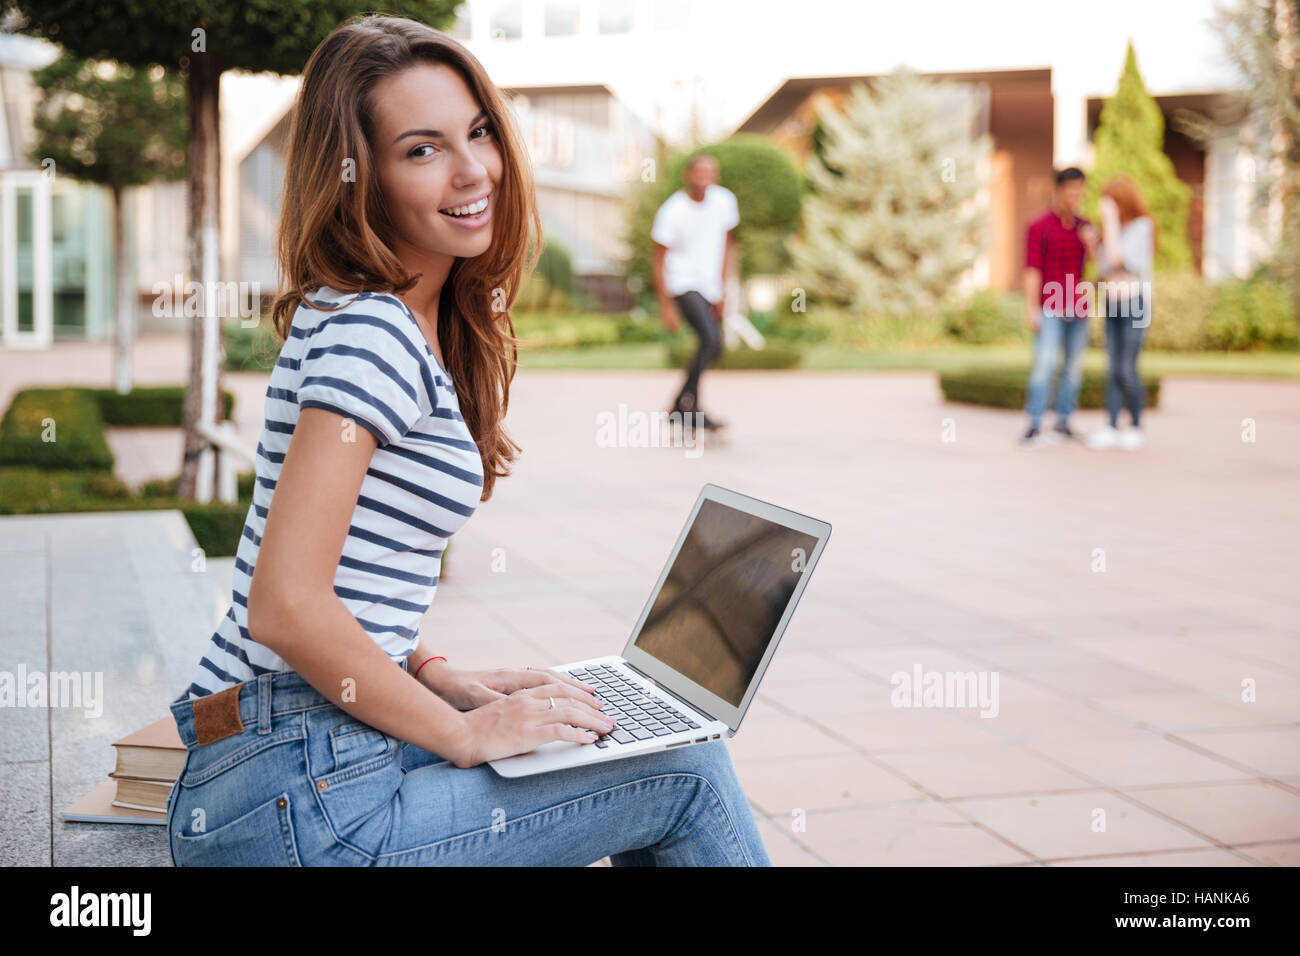 Portrait of smiling cute young woman working with laptop outdoors Stock Photo